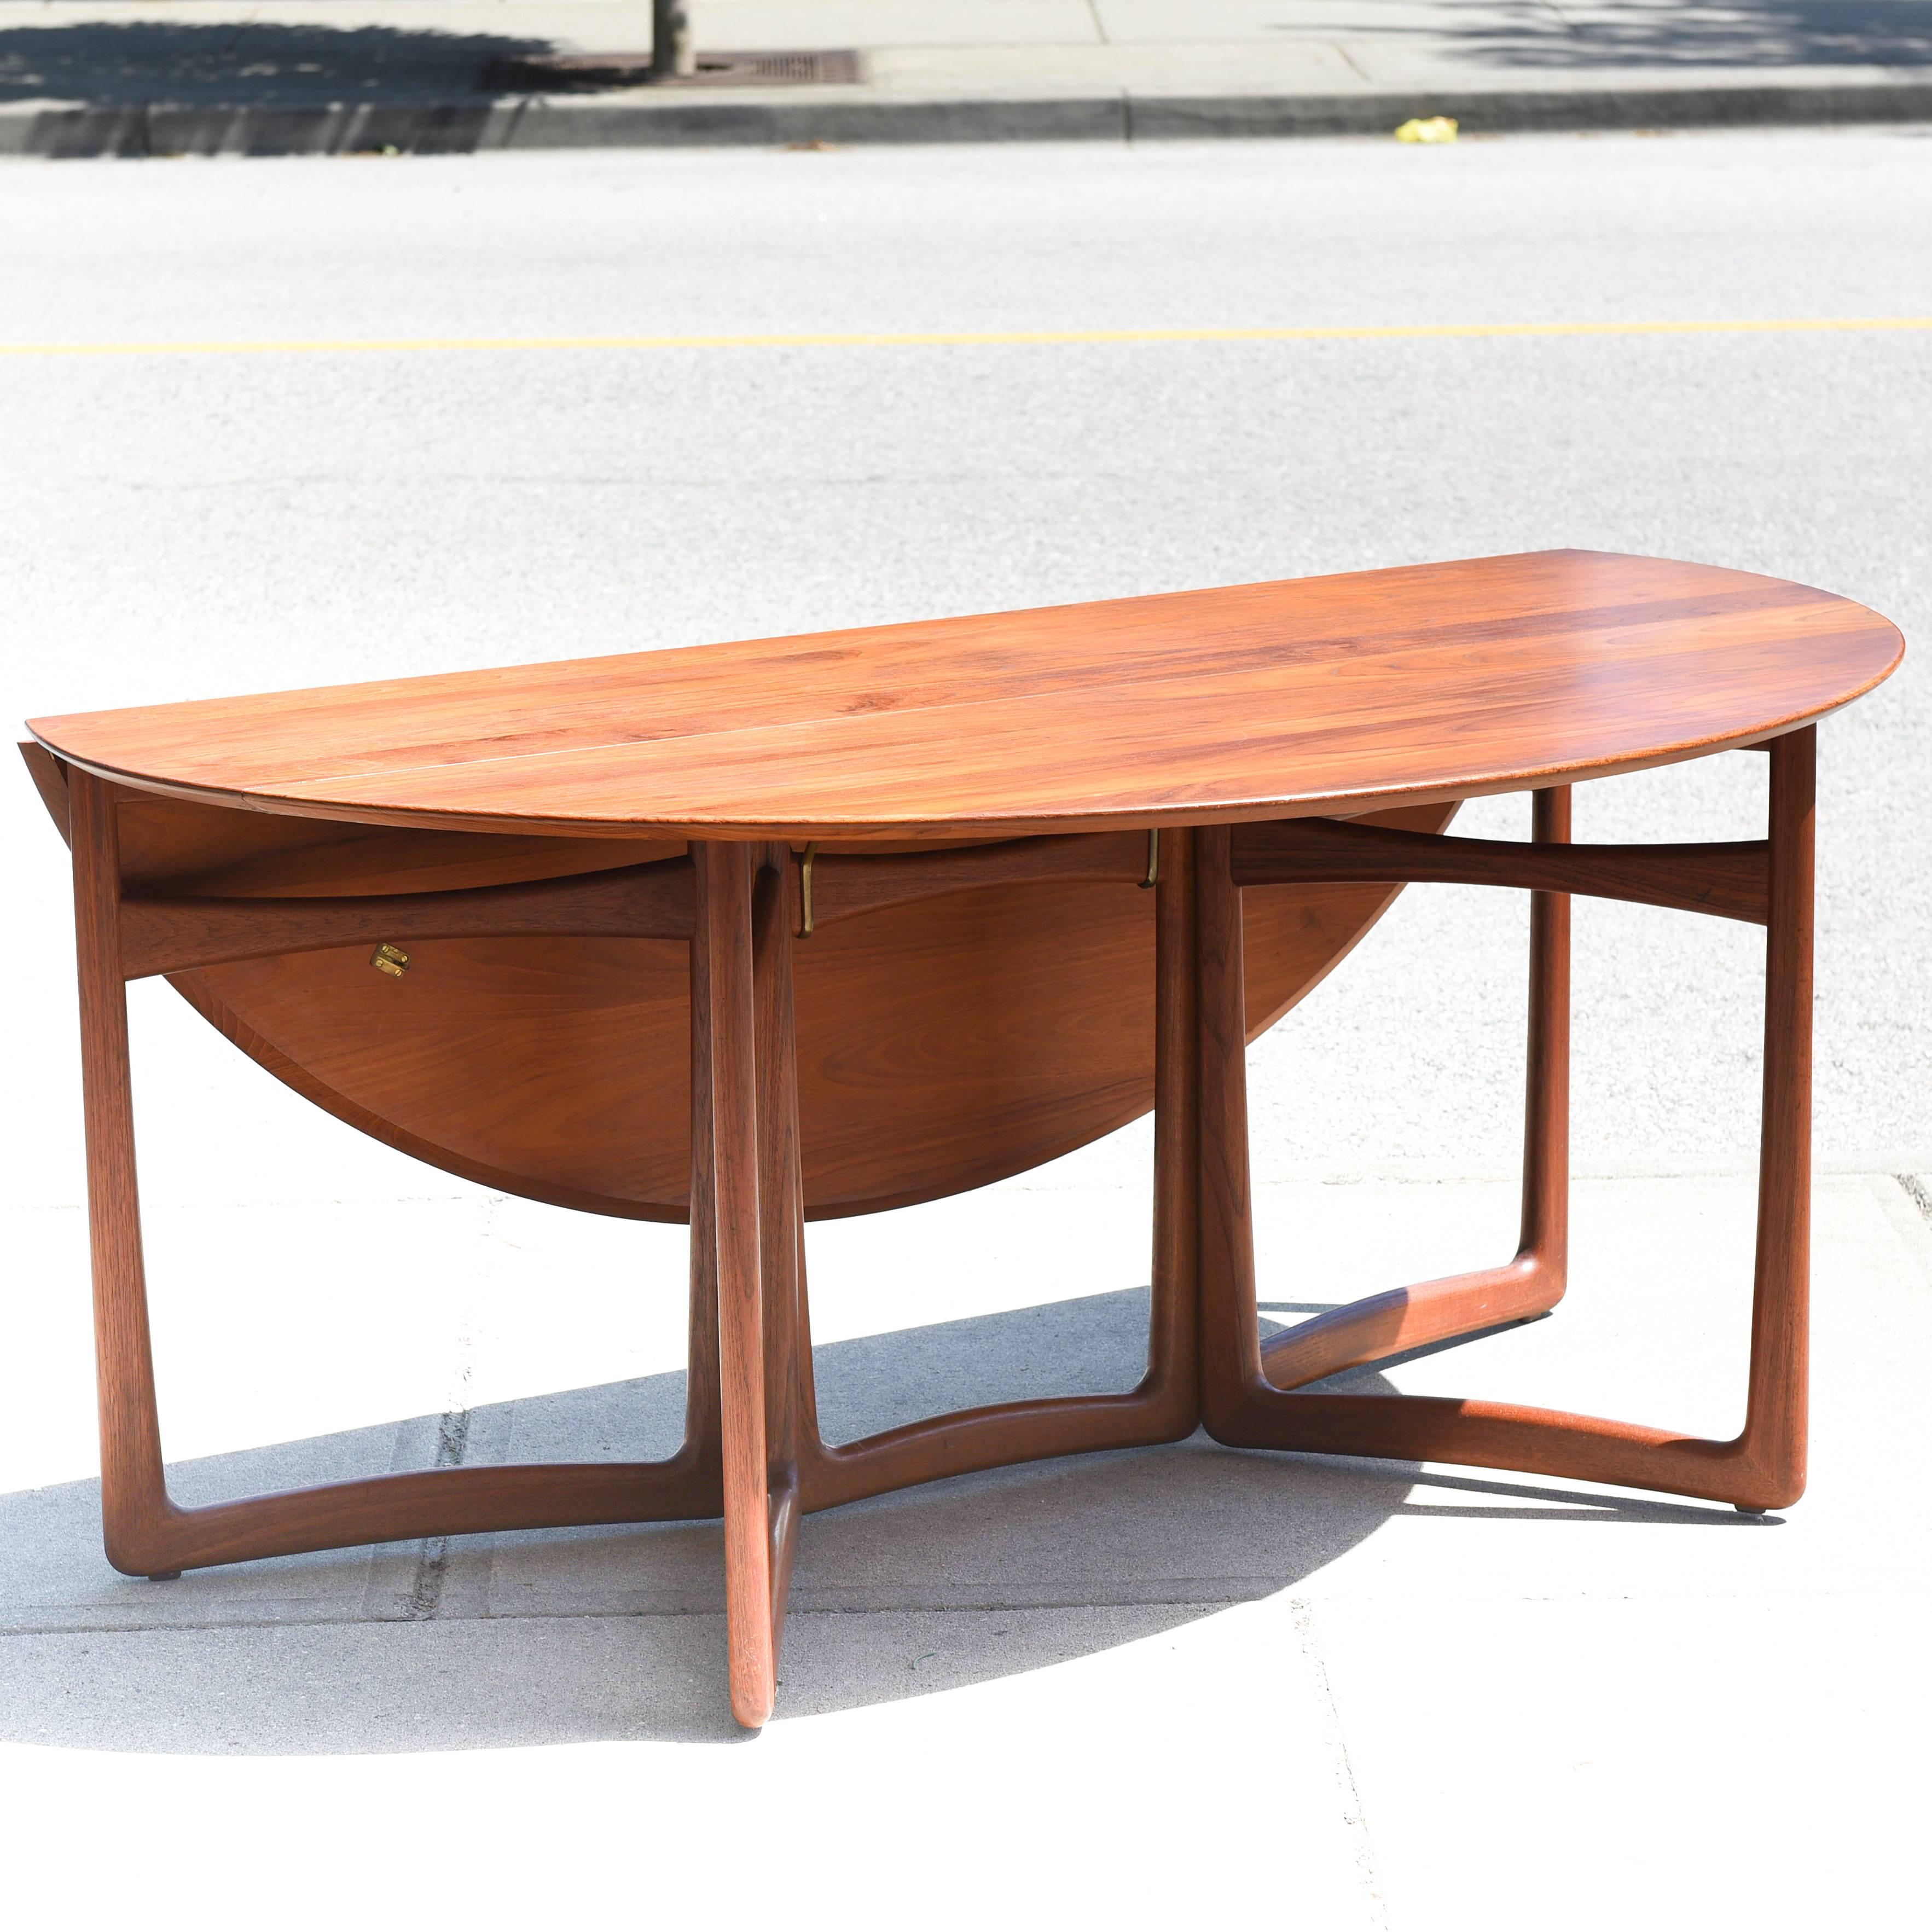 Model 20/59 solid teak gate-leg dining table designed by Peter Hvidt & Orla Mølgaard Nielsen, manufactured by France & Daverkosen. Superb vintage condition with rich patina and minor wear consistent with age and use.